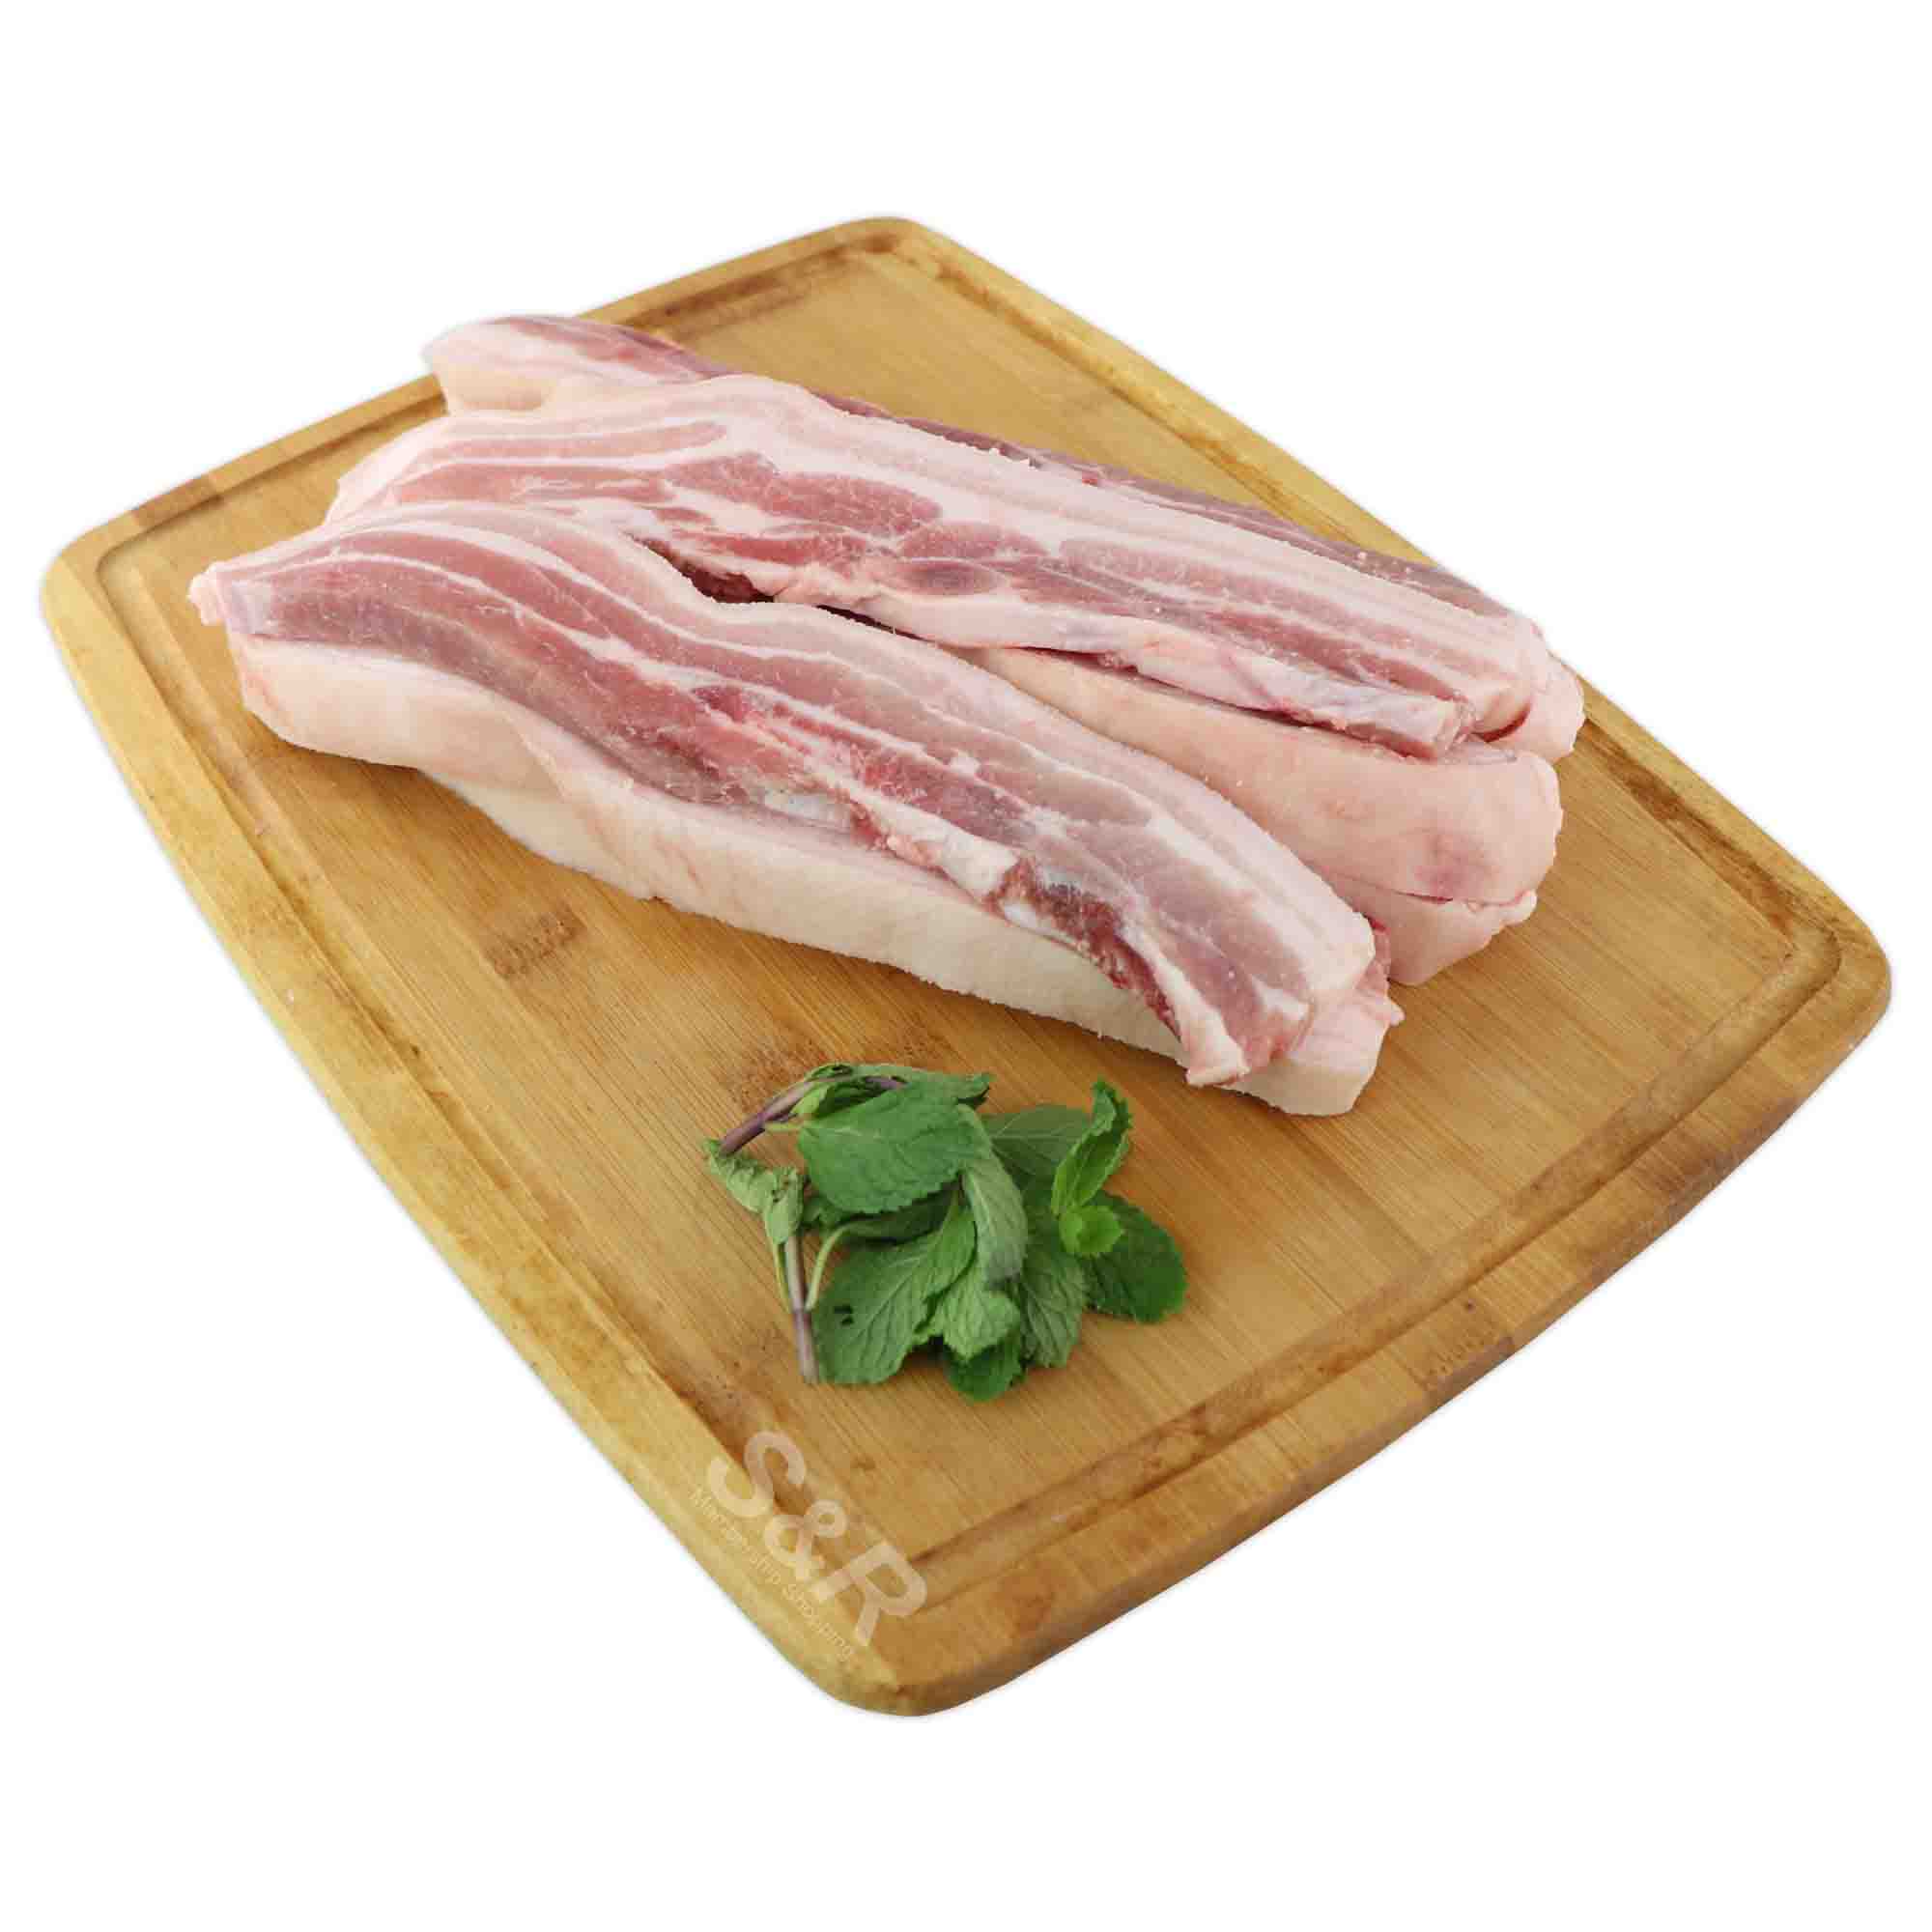 Members' Value Pork Country Style Belly approx. 1.7kg